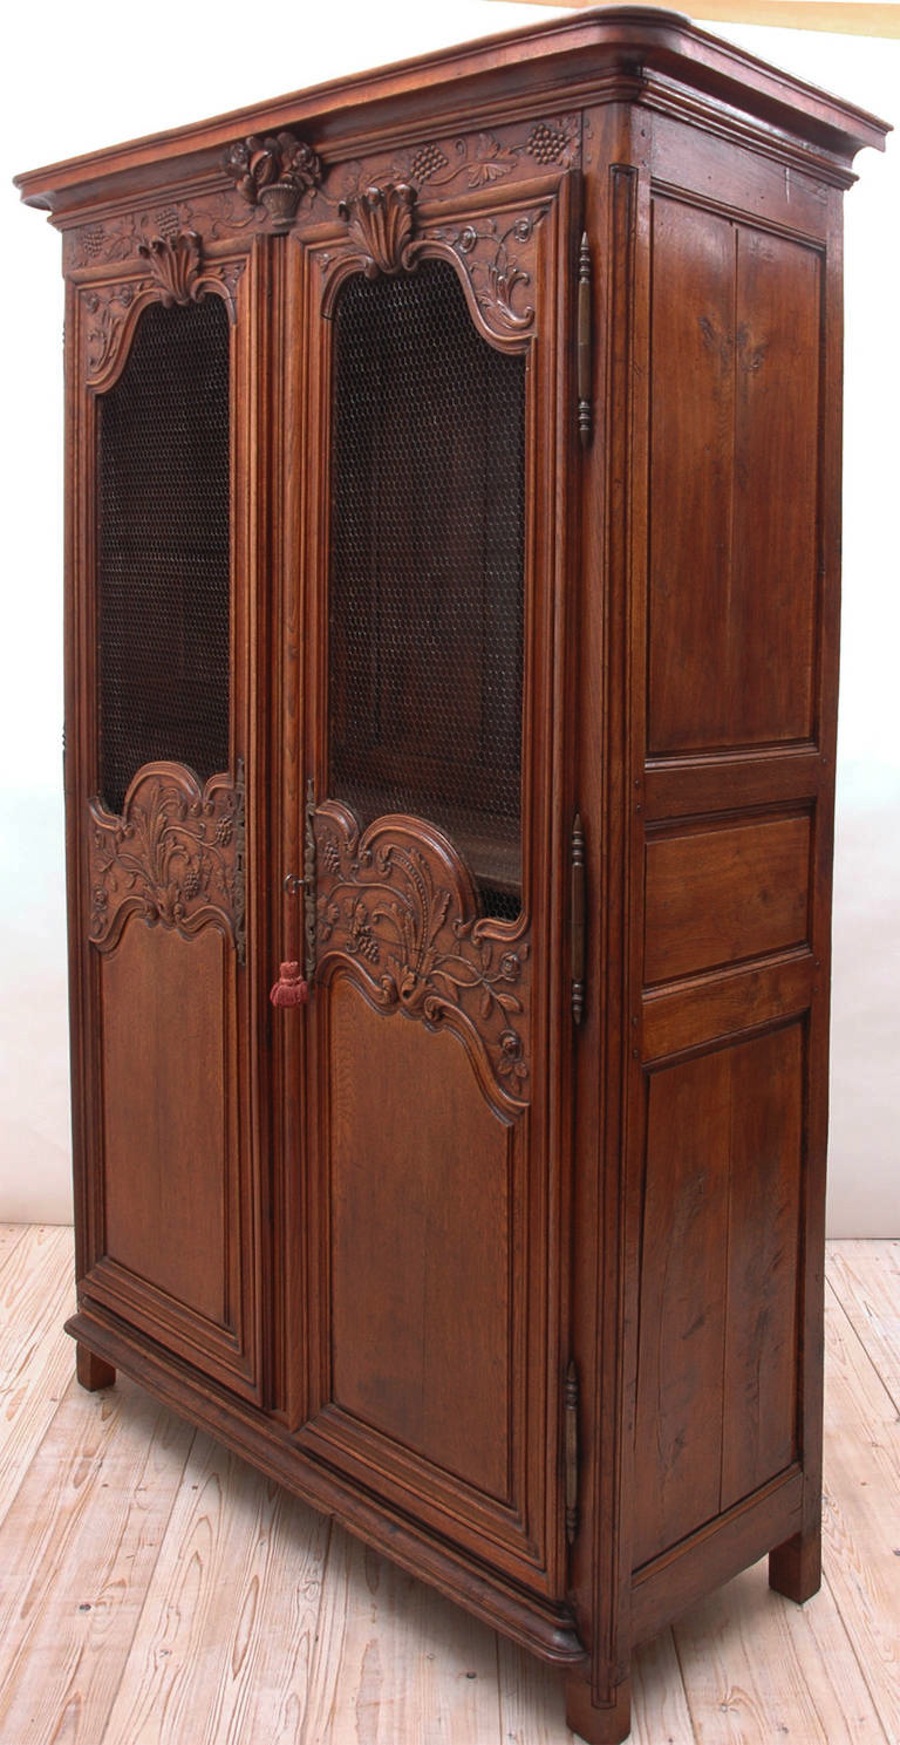 armoire-meaning-in-english-almoire